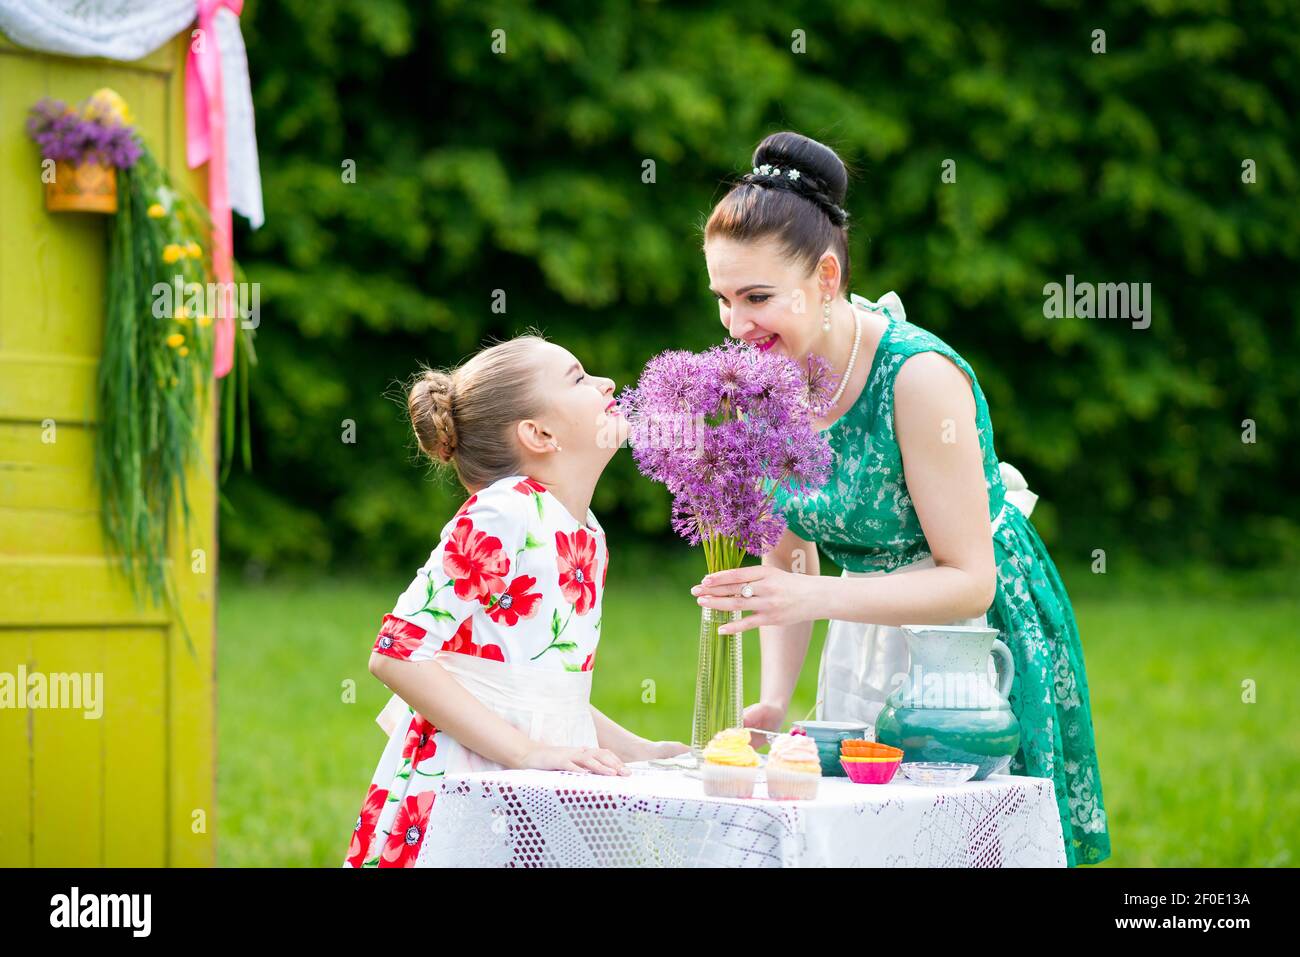 Mother and daughter cooking cupcakes Stock Photo